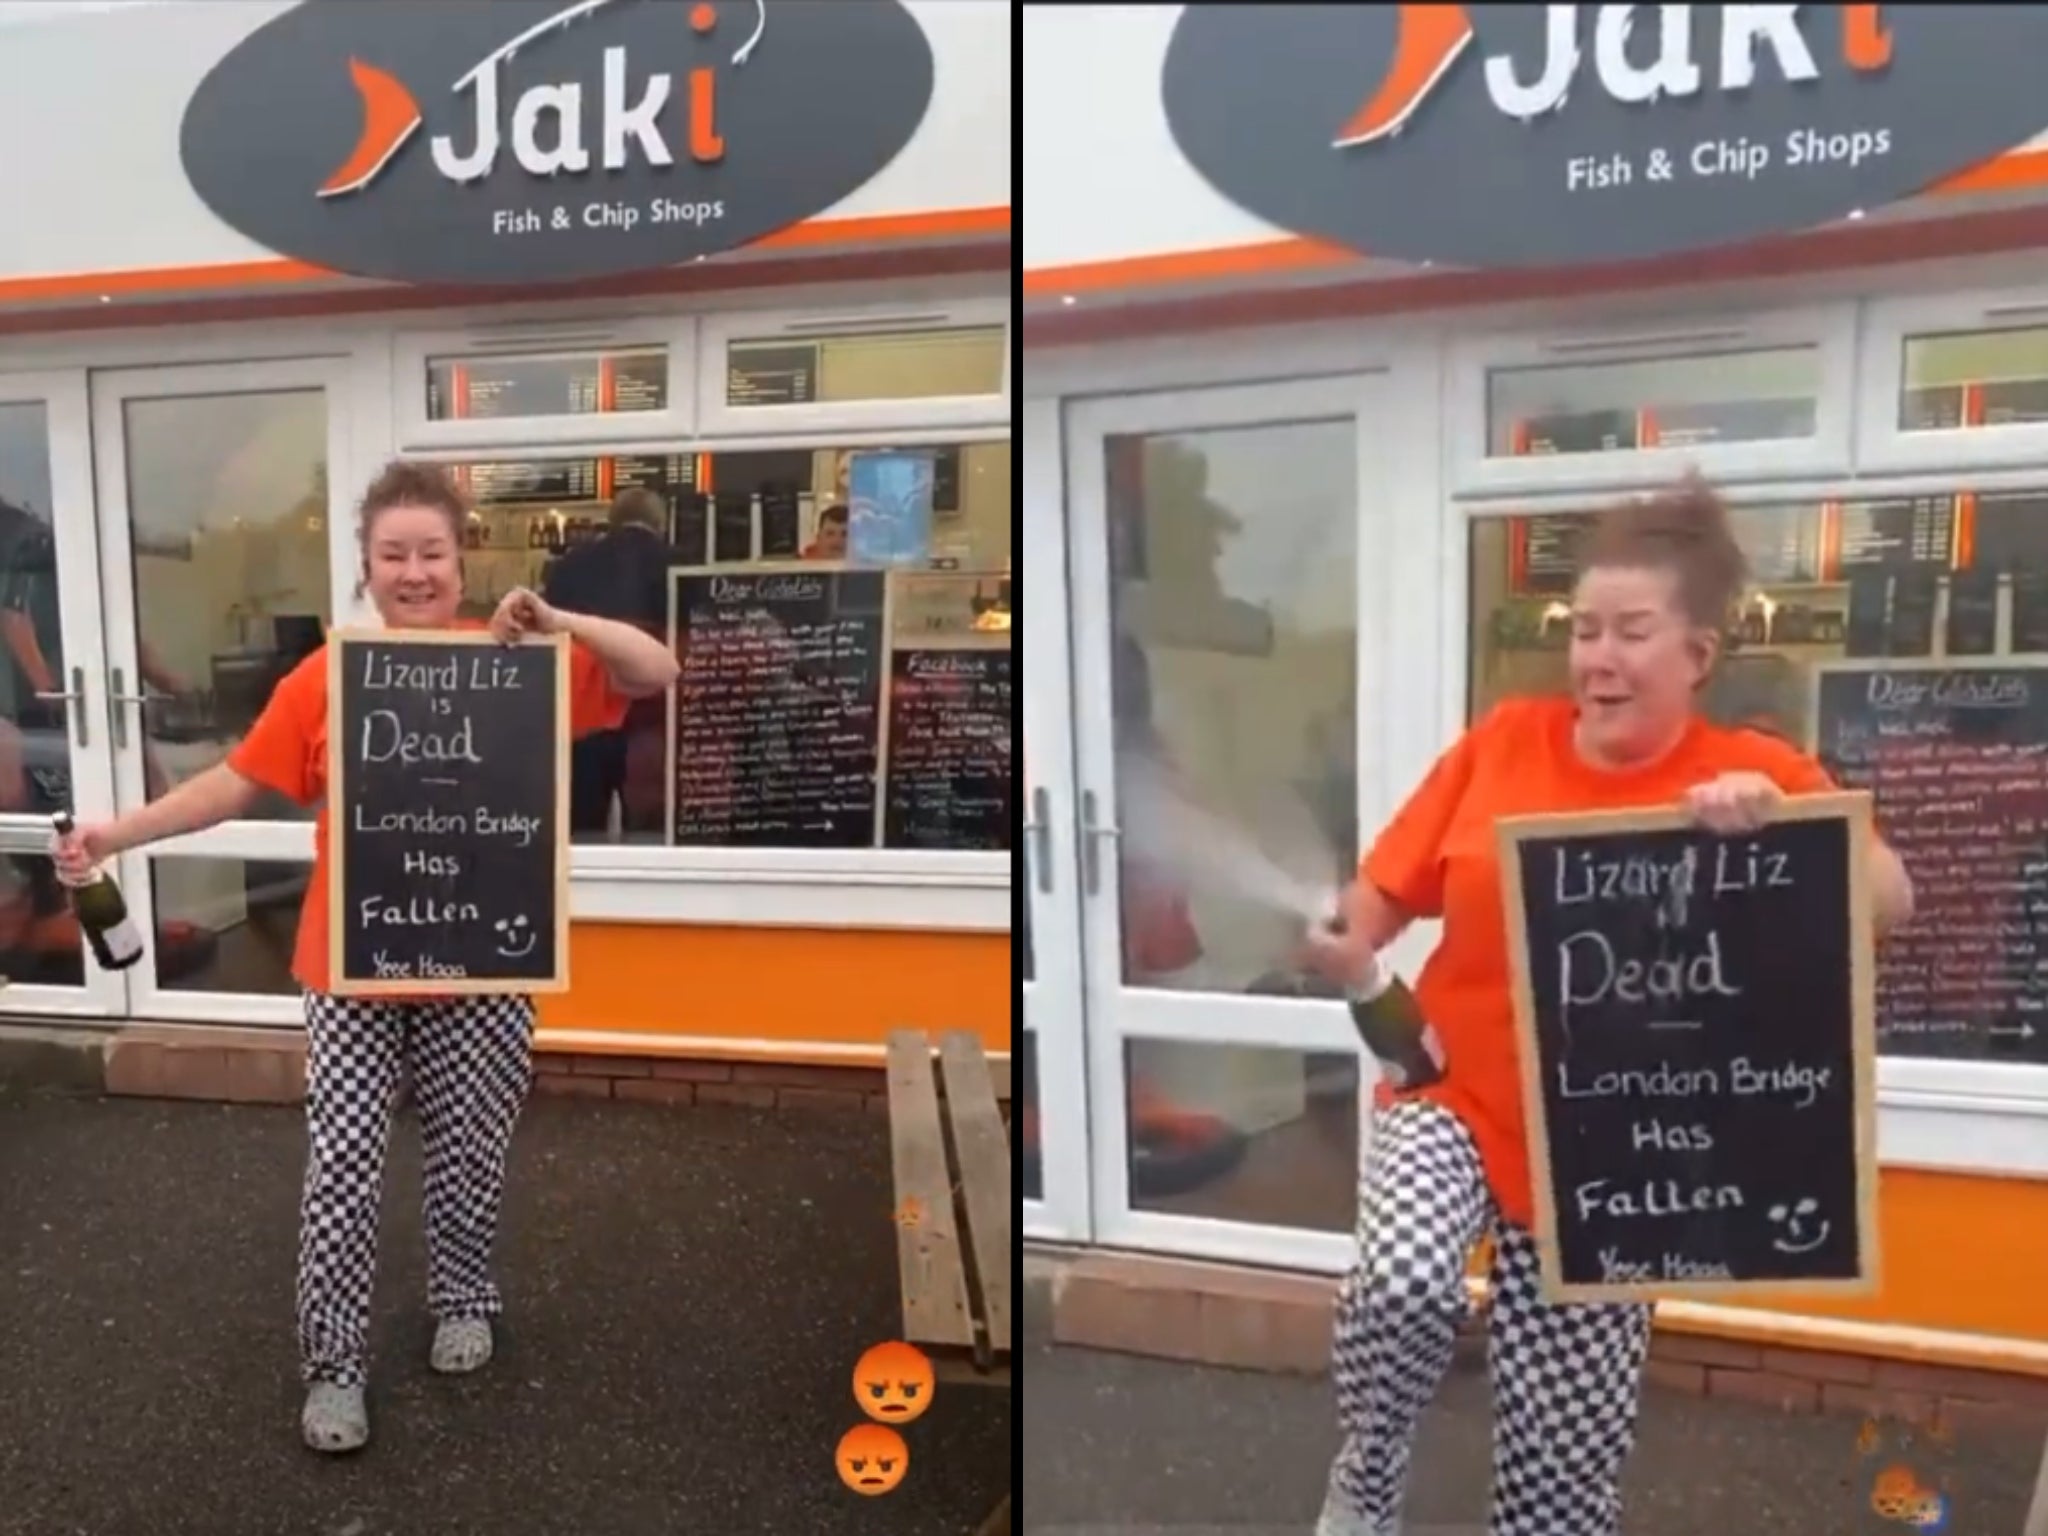 The owner of Jaki’s Fish and Chip Shop was criticised for posting a video celebrating the Queen’s death